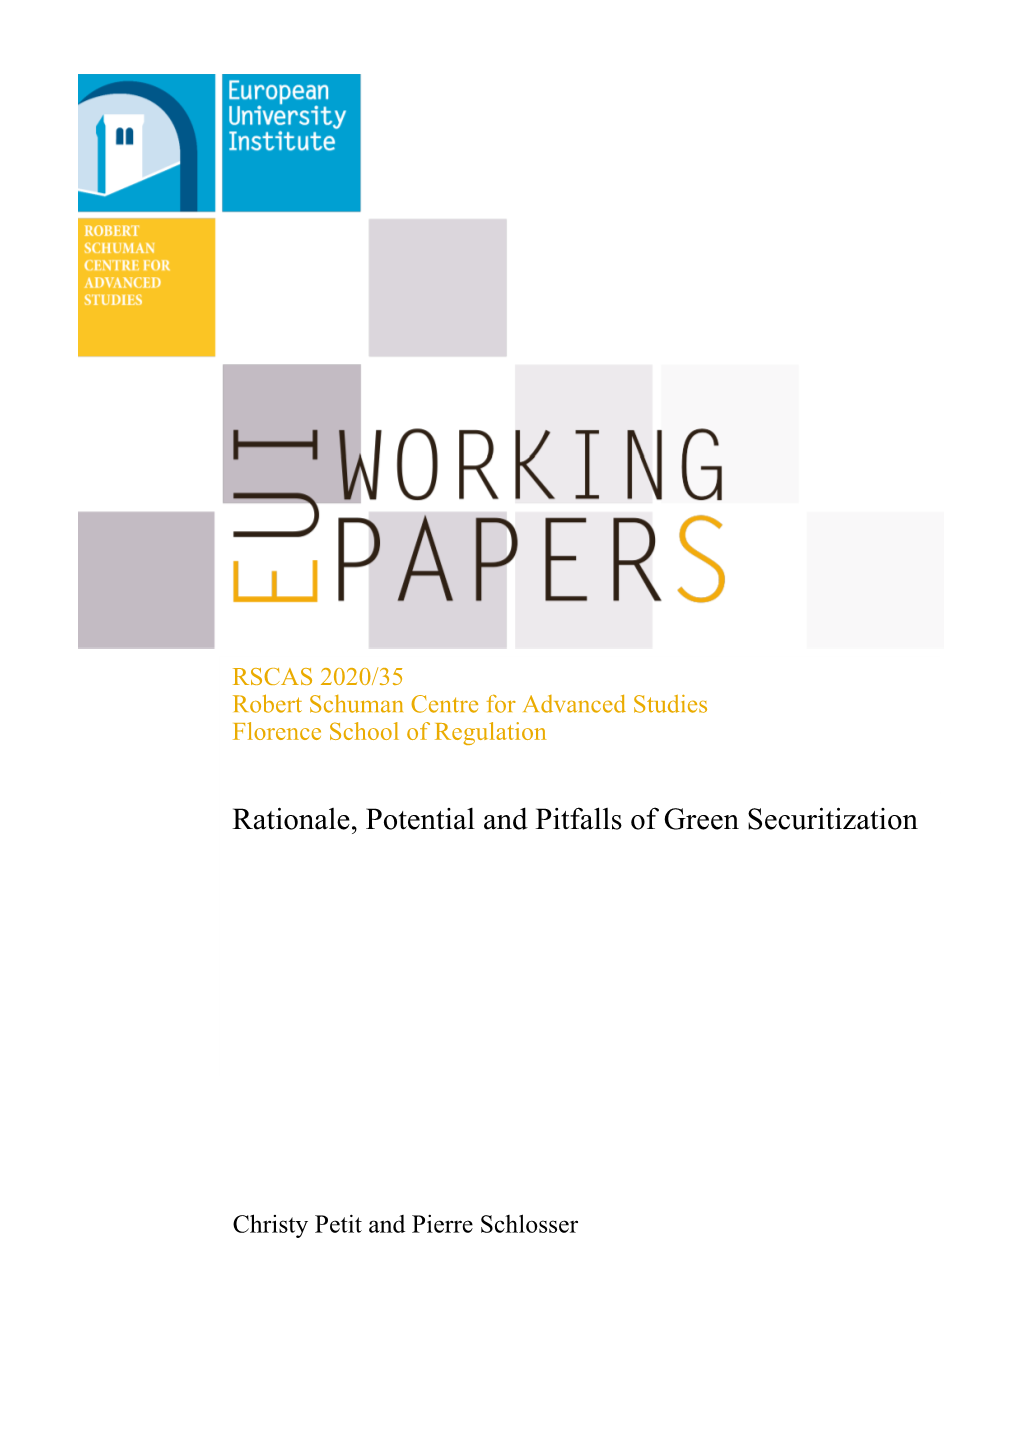 EUI RSCAS Working Paper 2020/35Rationale, Potential and Pitfalls of Green Securitization